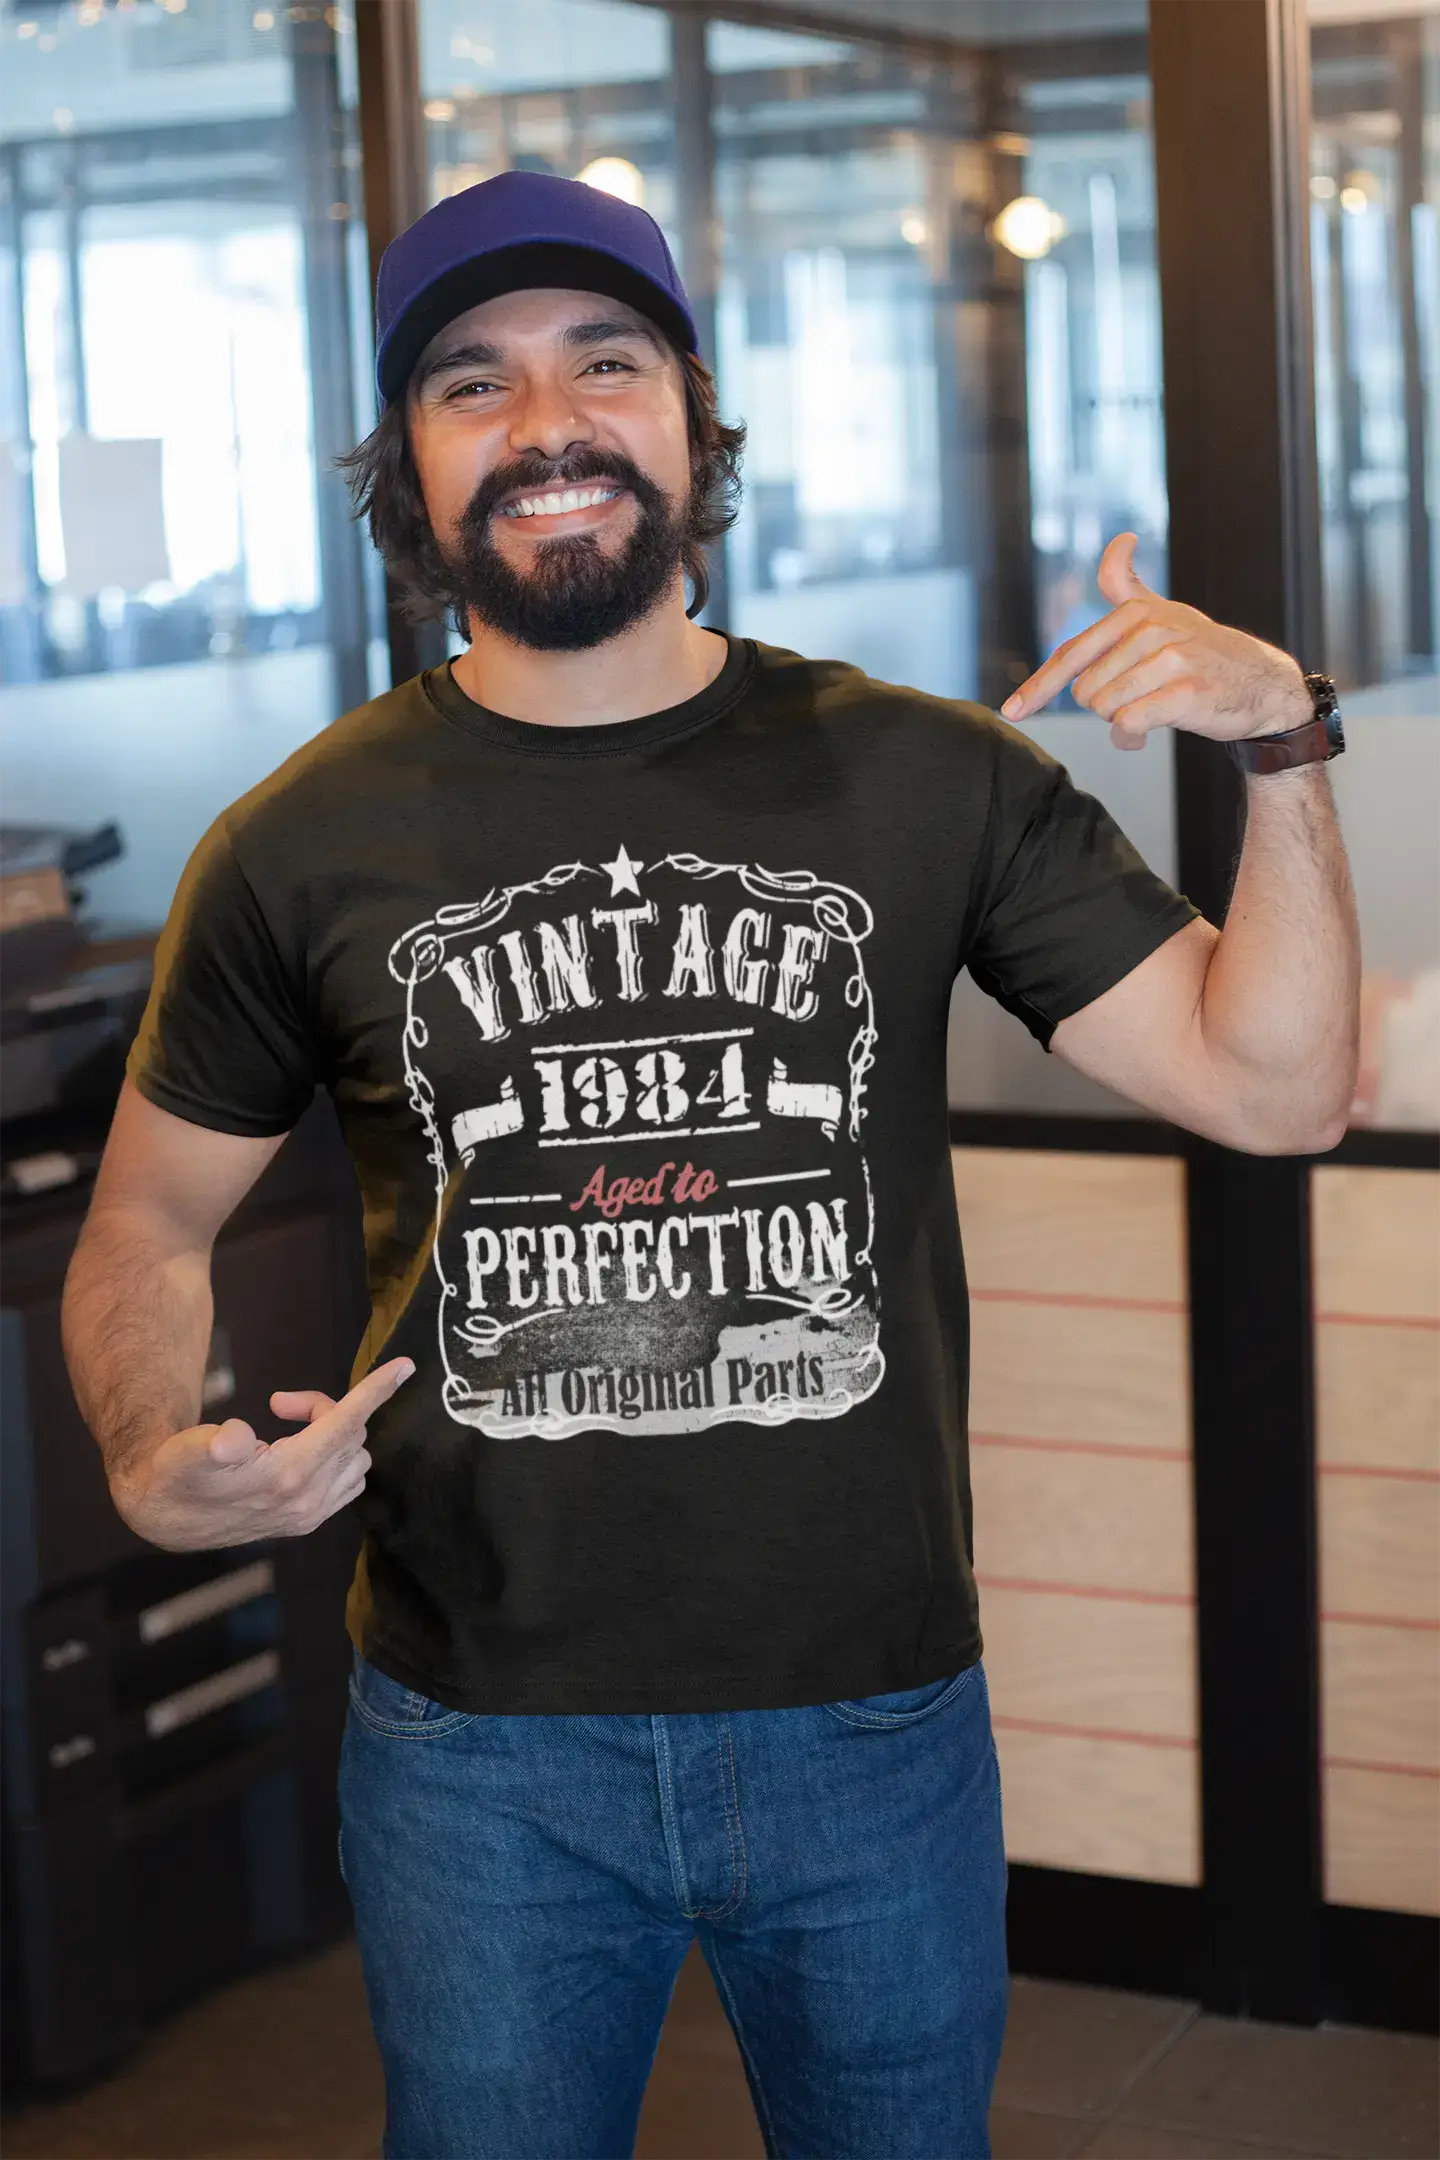 1984 Vintage Aged to Perfection Men's T-shirt Black Birthday Gift 00490